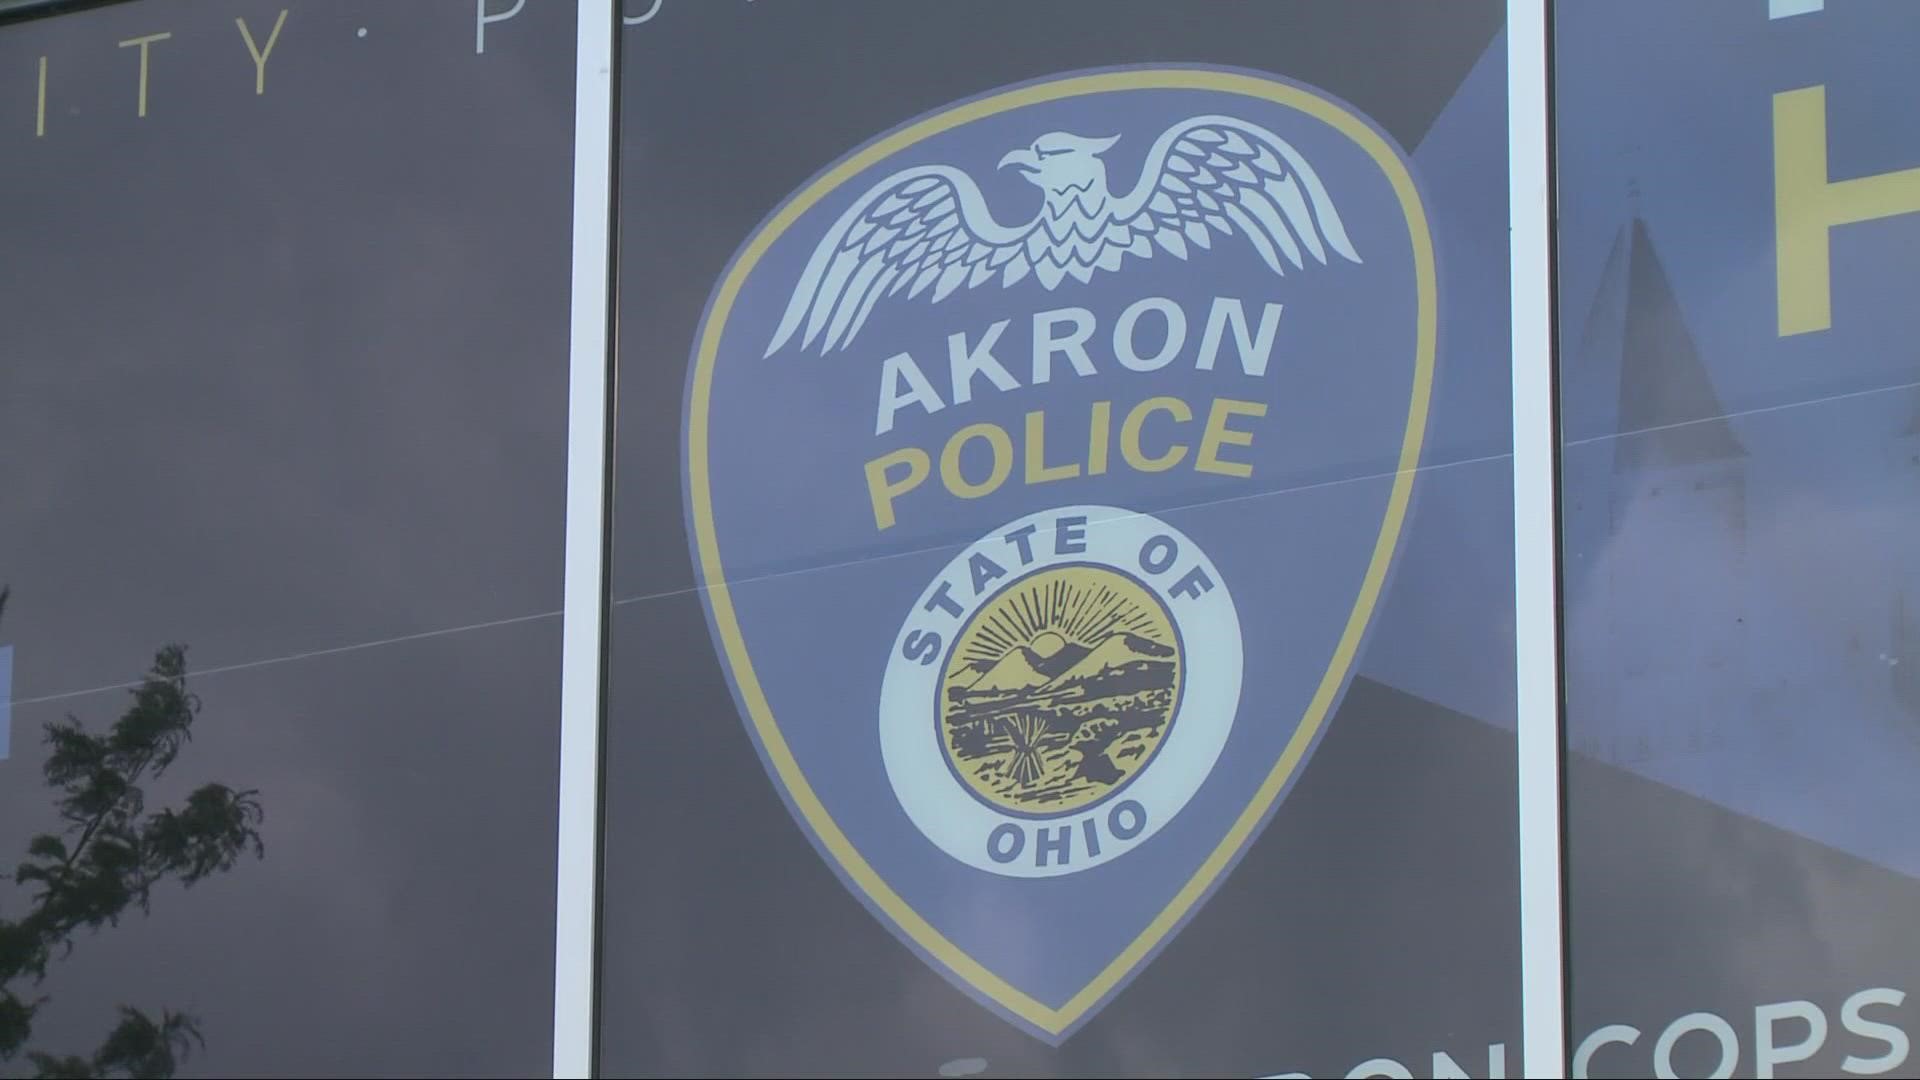 Akron Police Chief Steve Mylett was asked about reports that officers in the city are no longer wearing badges or name tags.